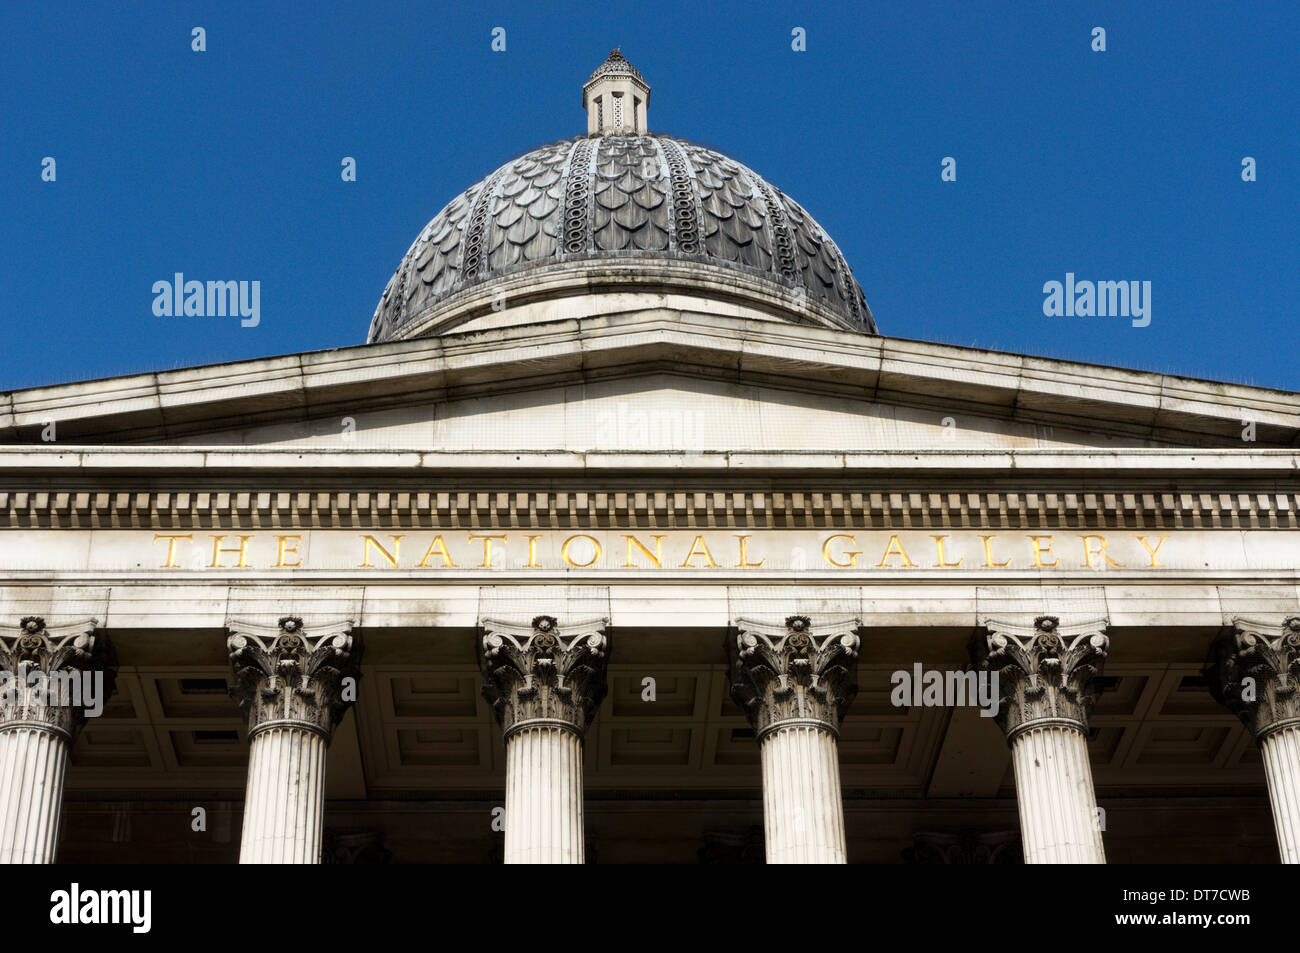 The name of The National Gallery carved below the pediment on the front of the building, London, England. Stock Photo